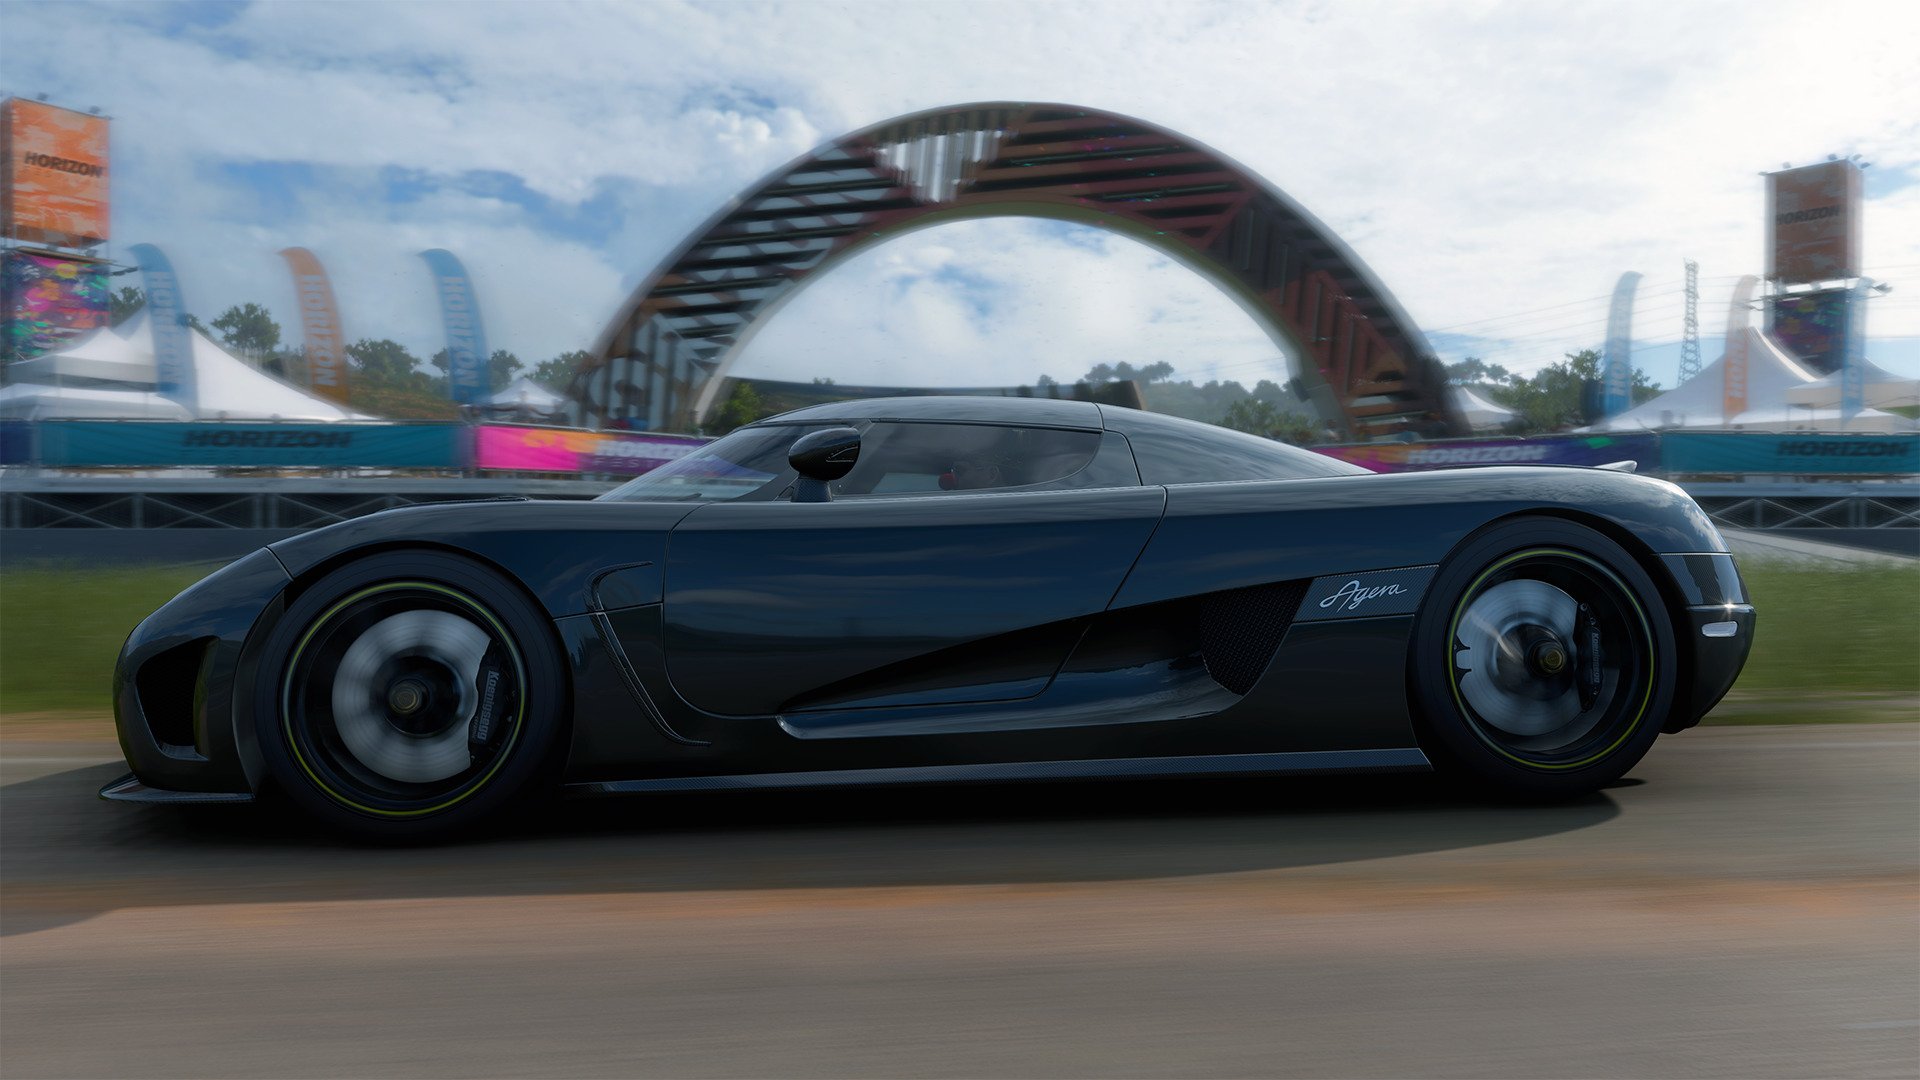 Forza Horizon 5 Series 6 Update Brings Changes to Progression